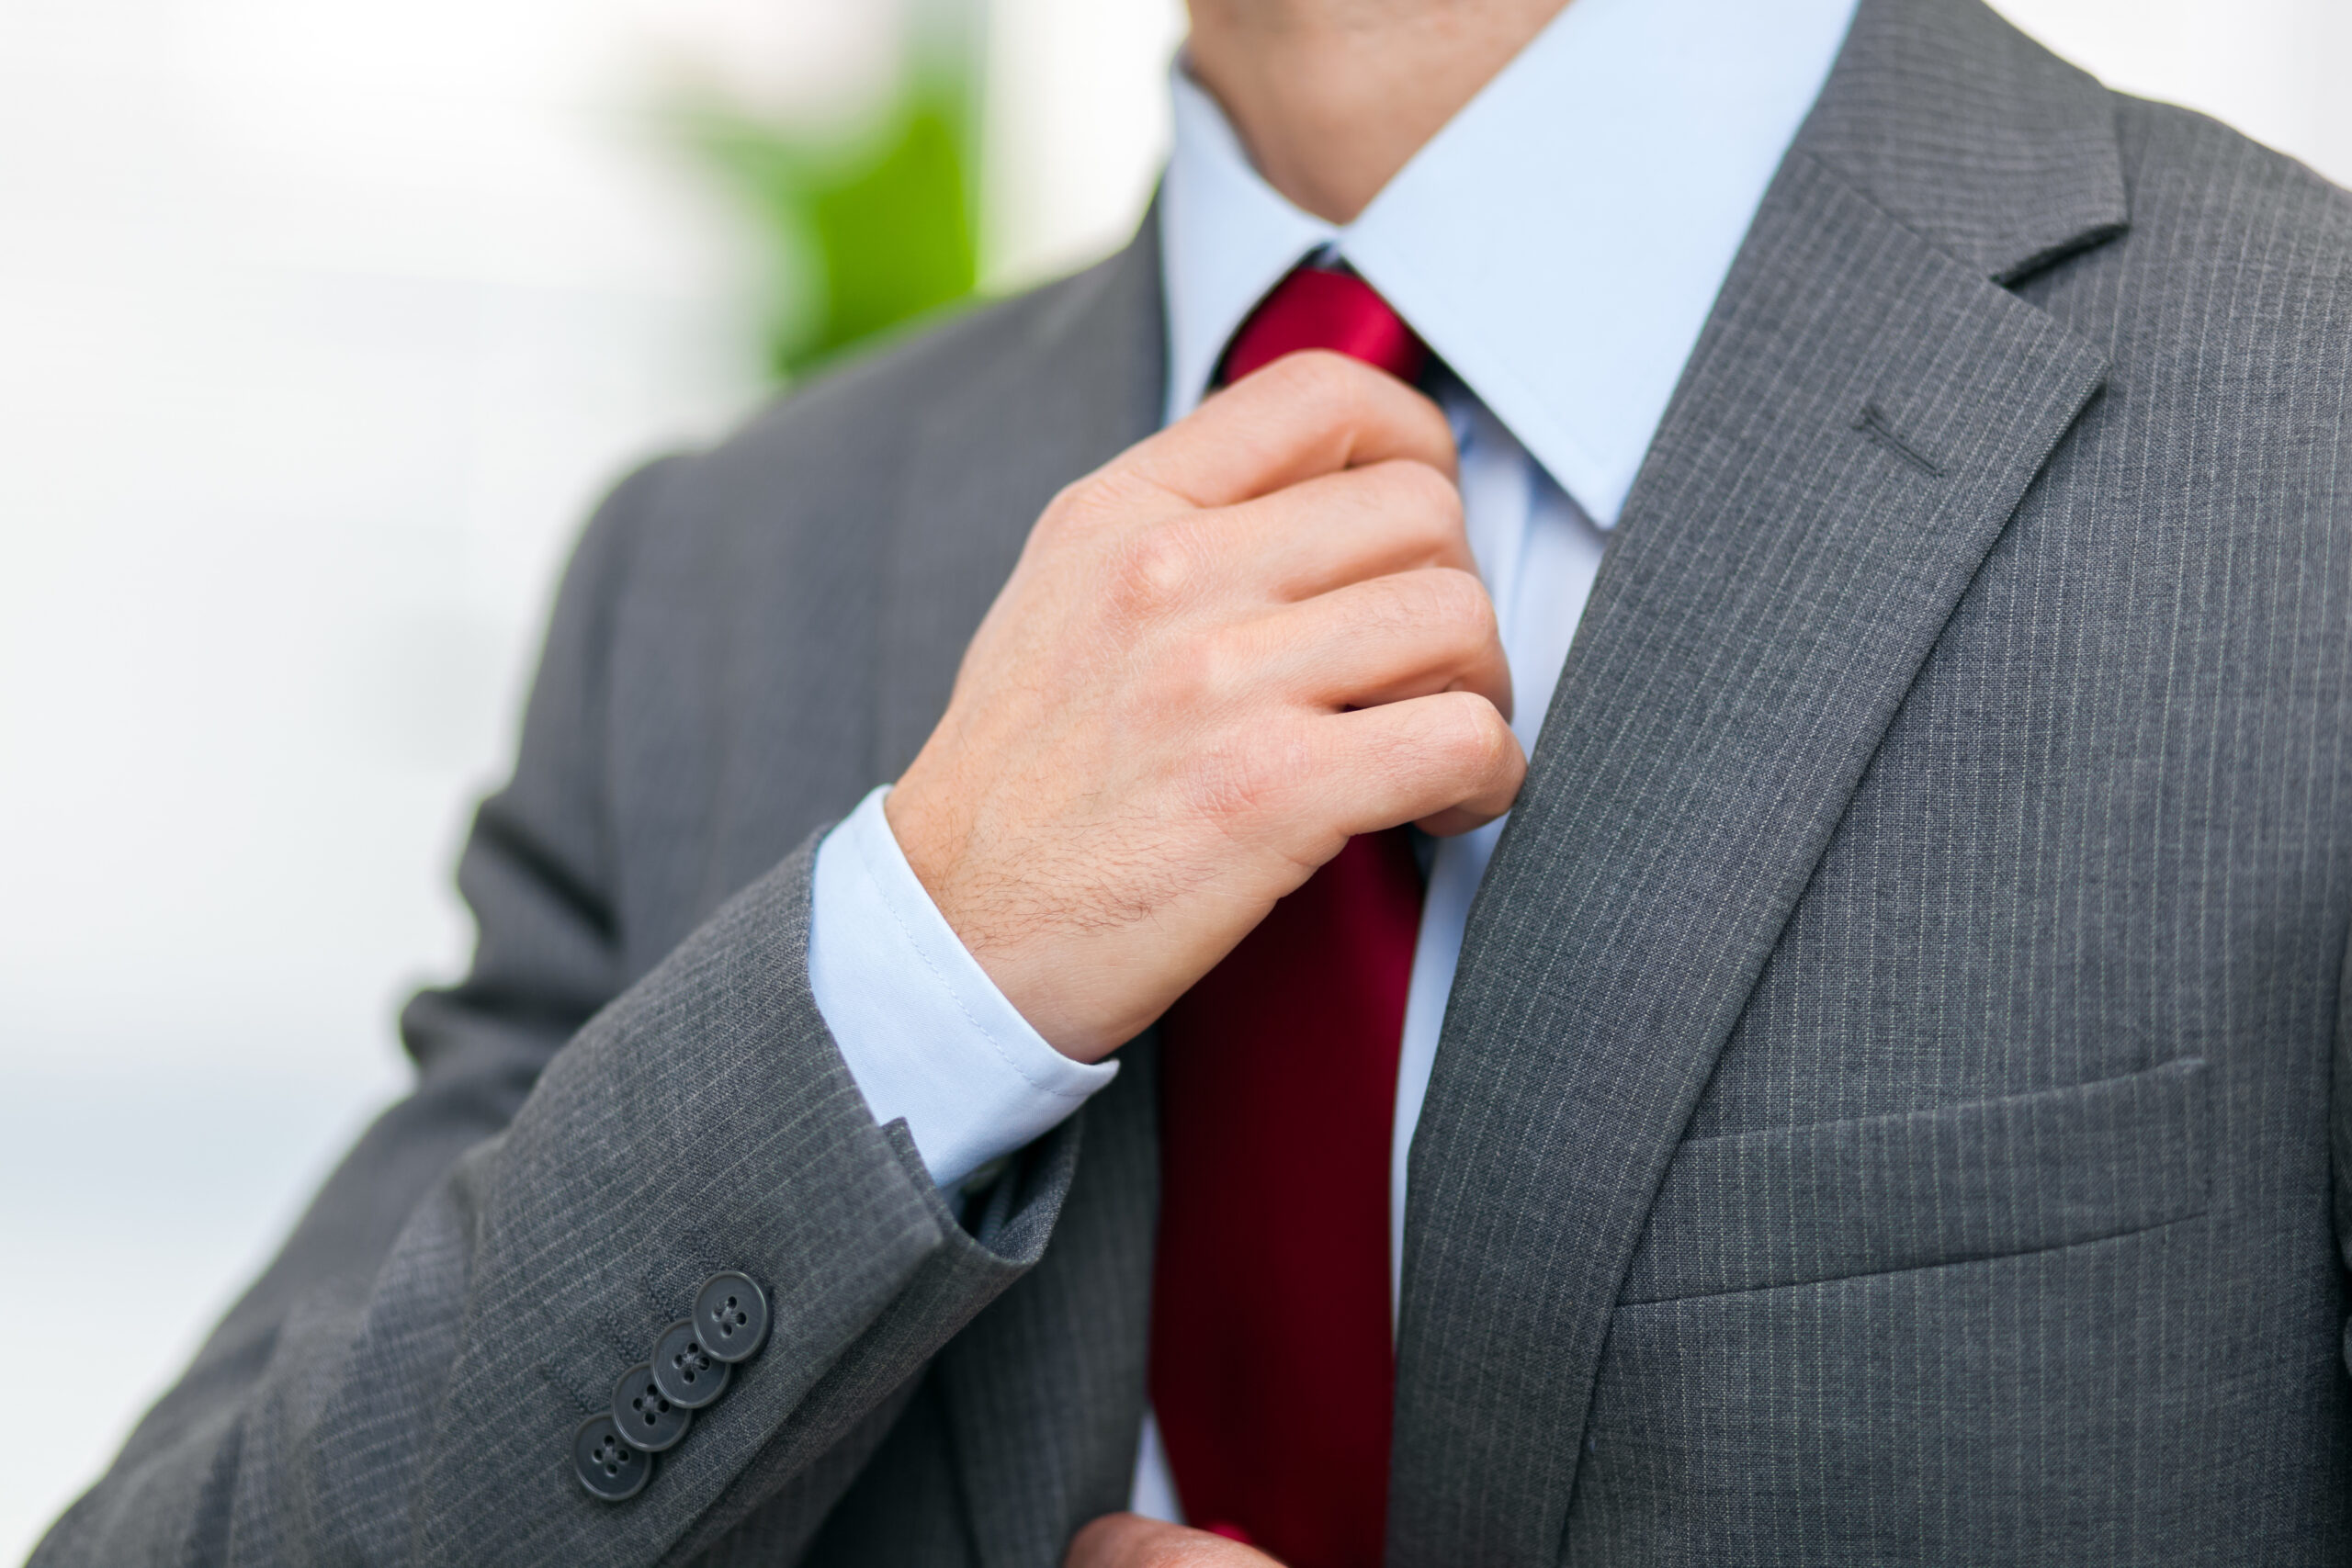 Dress for success - smarten up your appearance at work - Small Business UK